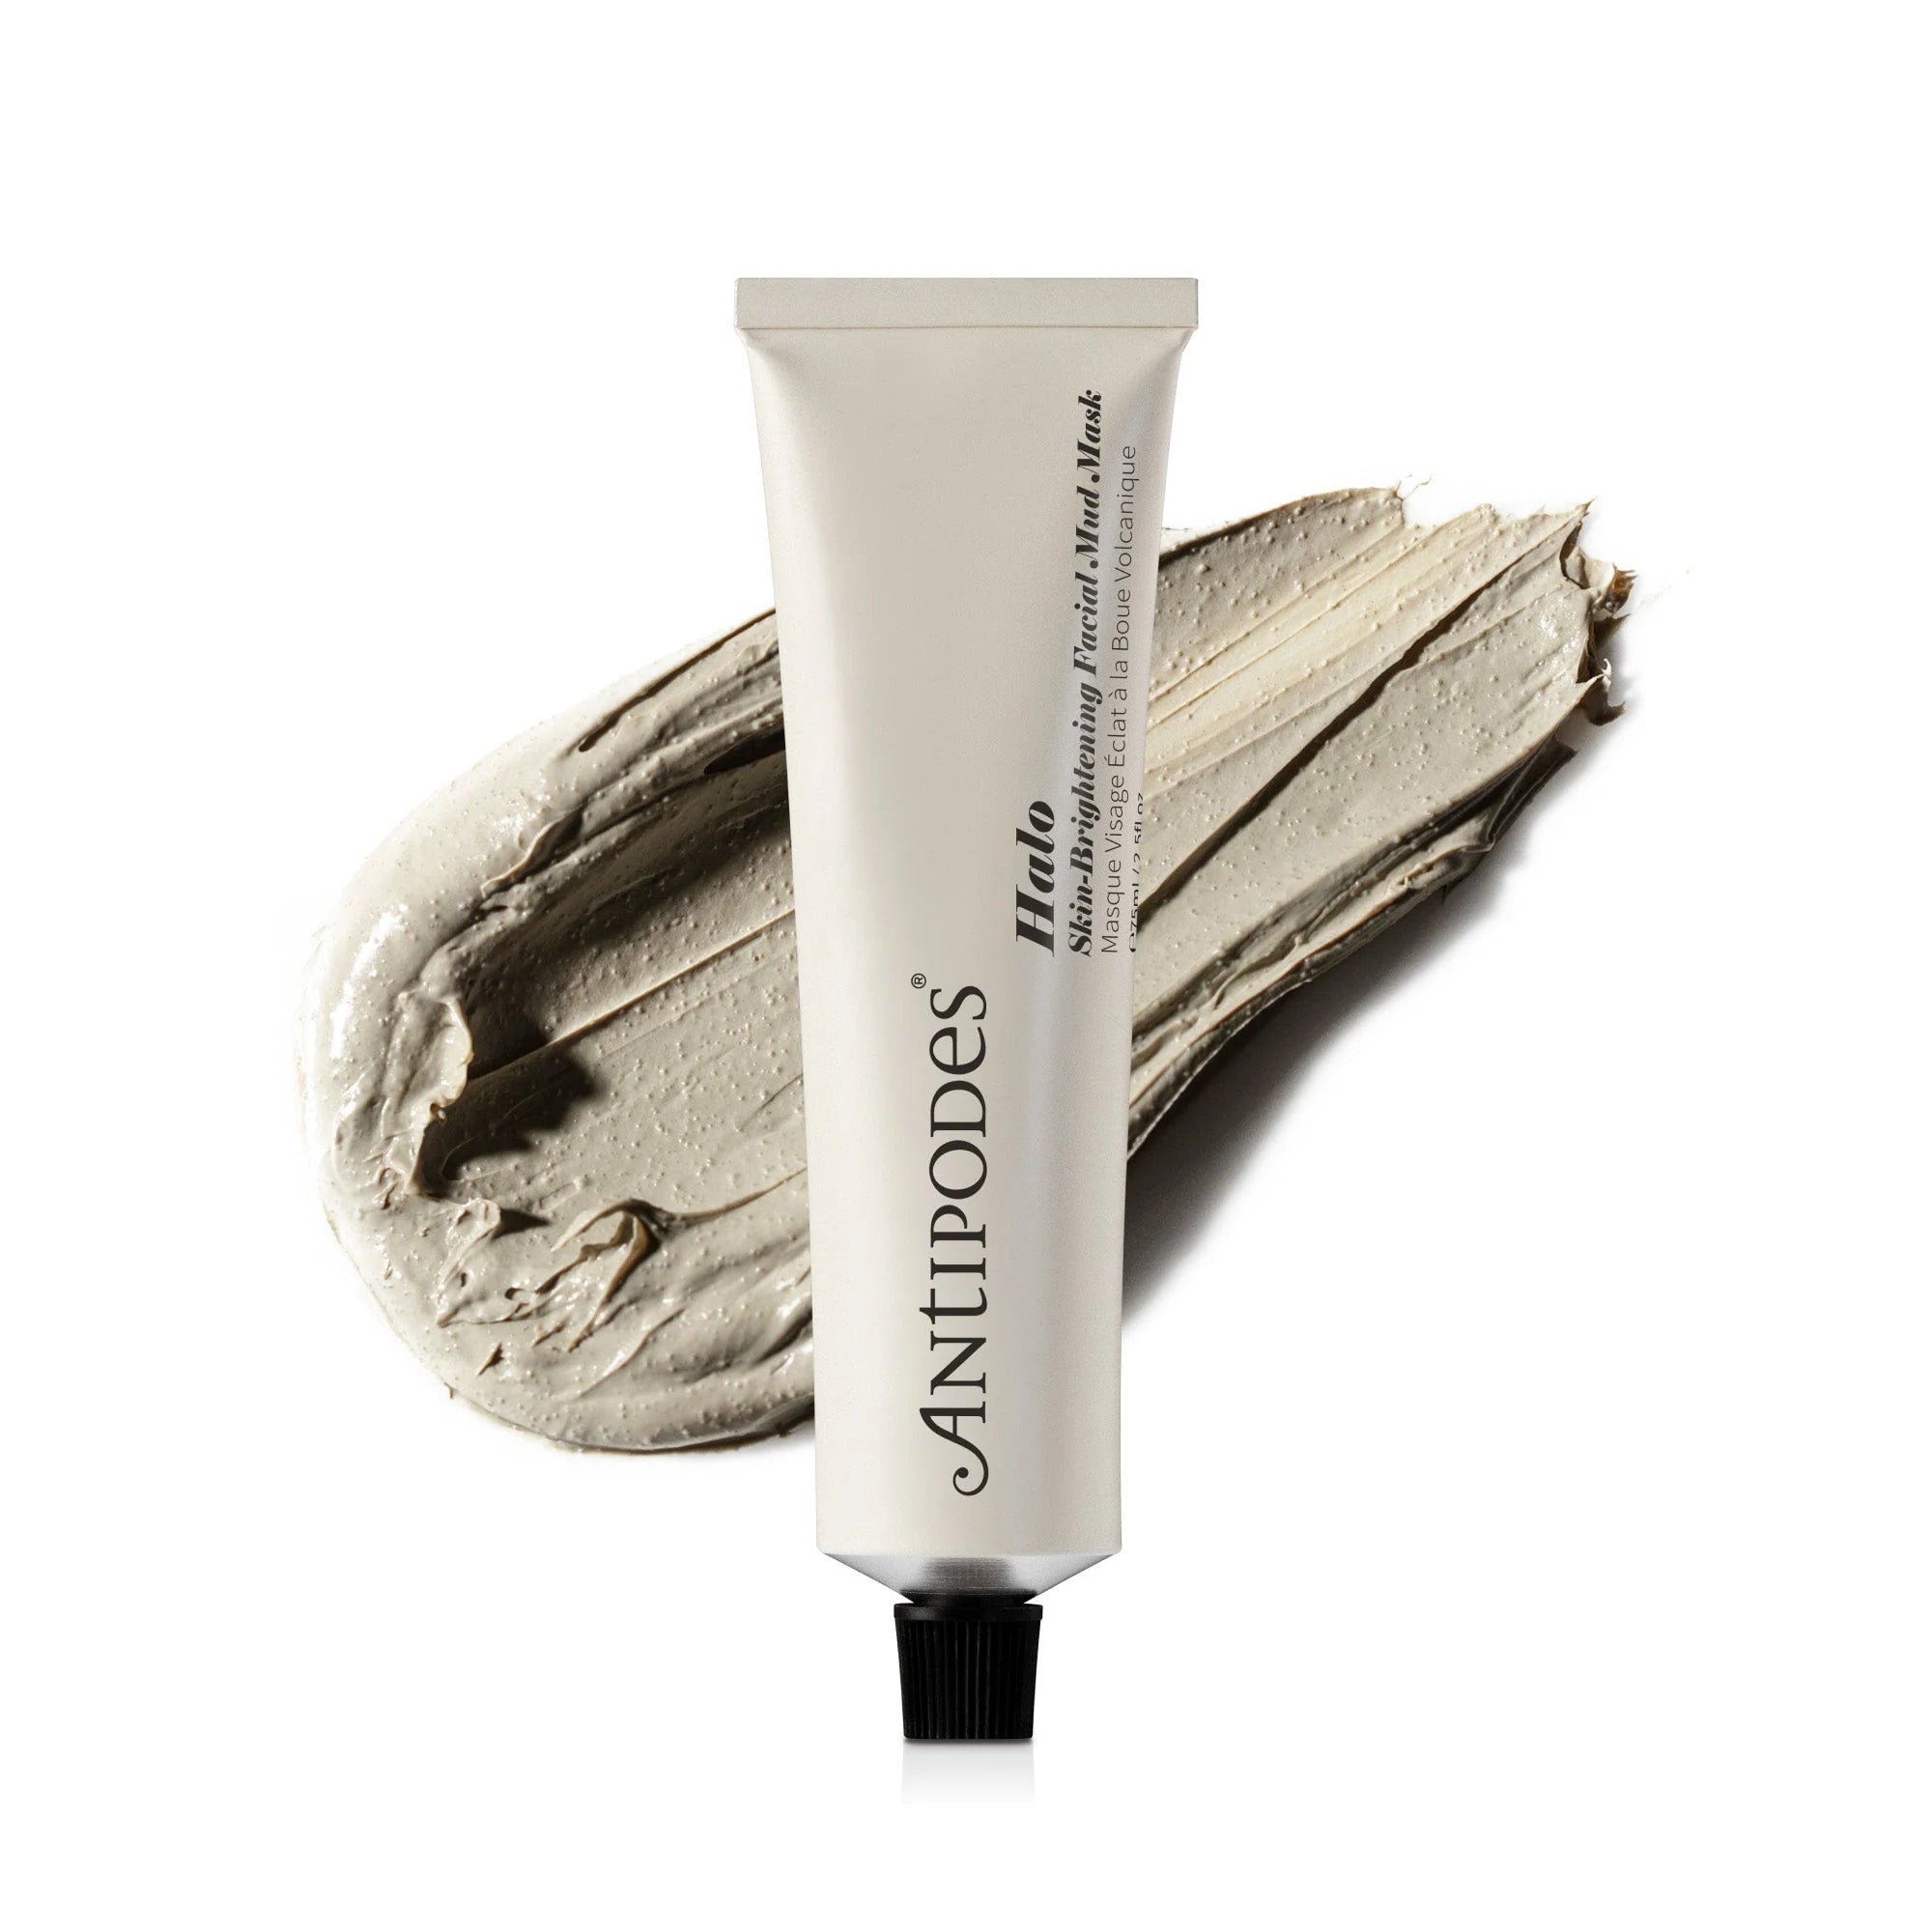 Antipodes Halo Skin-Brightening Facial Mud Mask 75g-The Living Co.